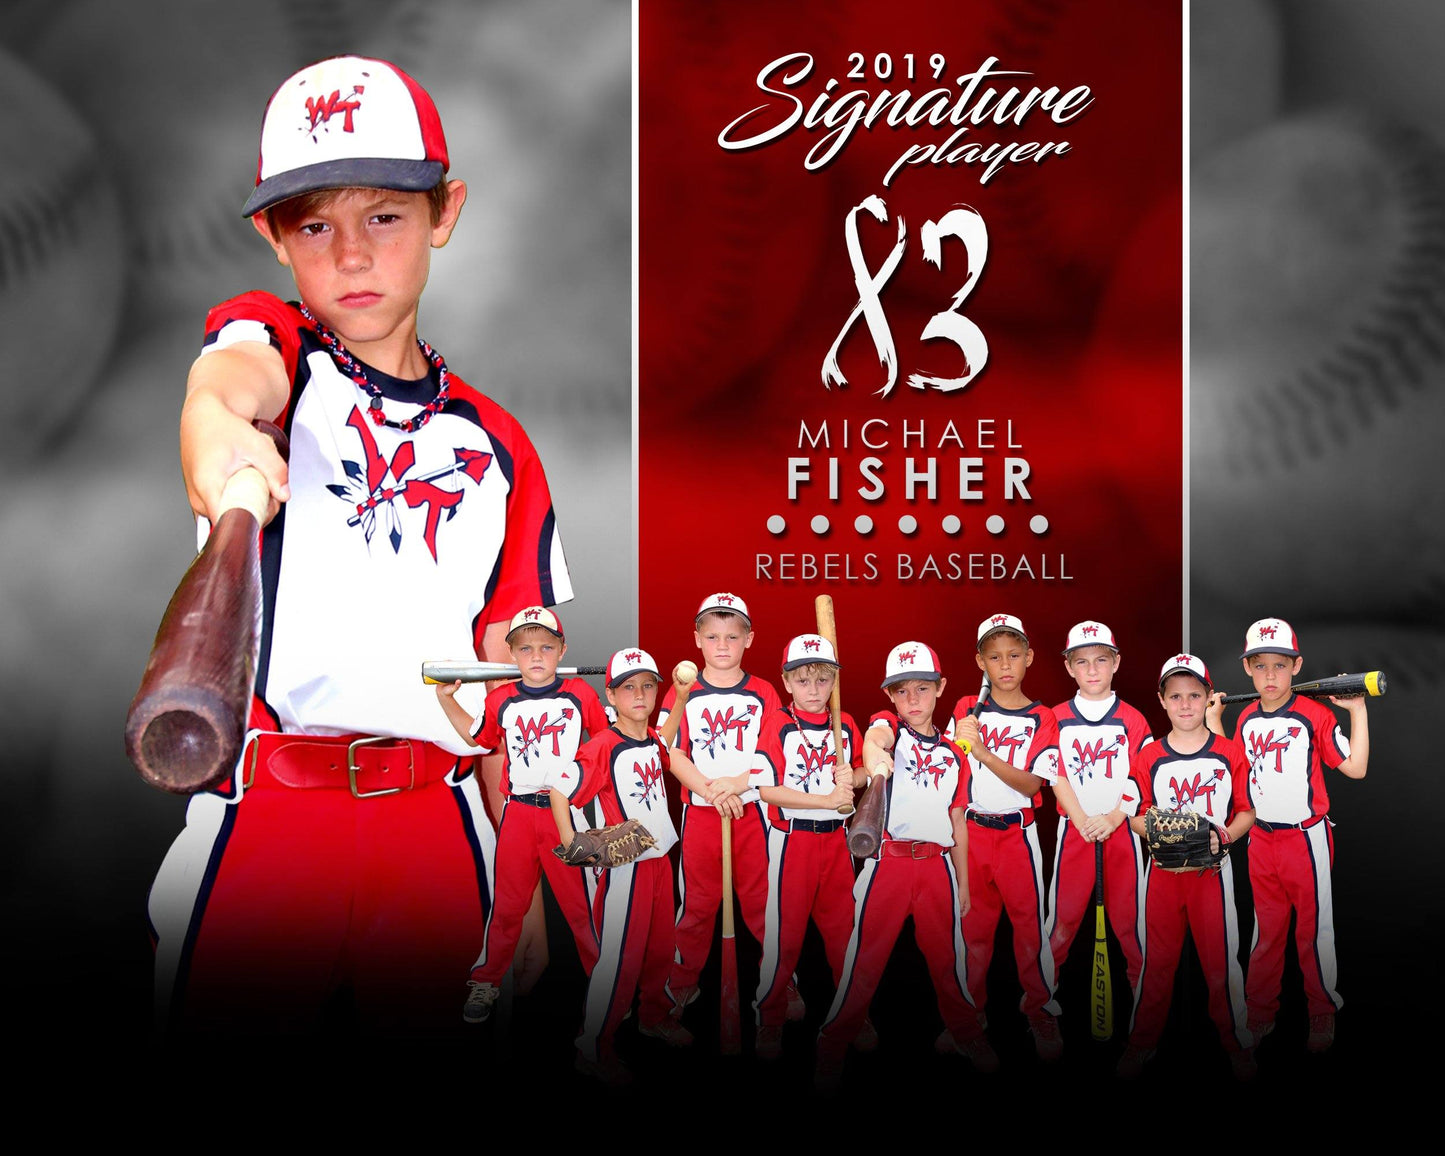 Signature Player - Baseball - V1 - Extraction Memory Mate H Template-Photoshop Template - Photo Solutions